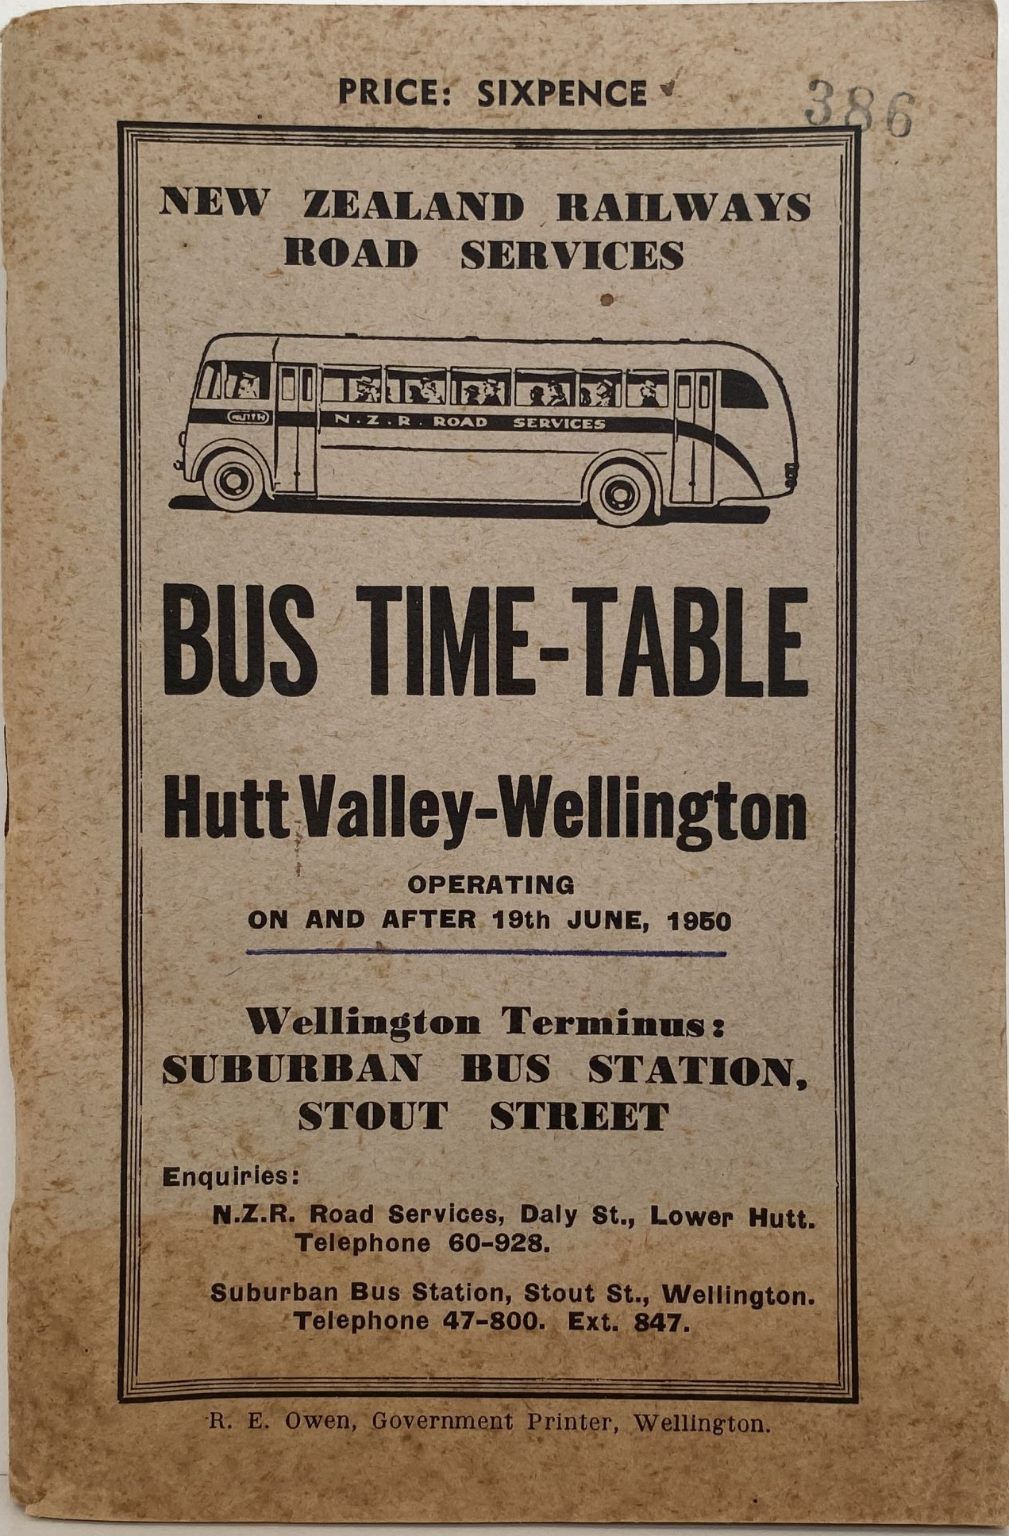 NZ RAILWAYS ROAD SERVICES BUS TIME TABLE for Hutt Valley - Wellington 1950